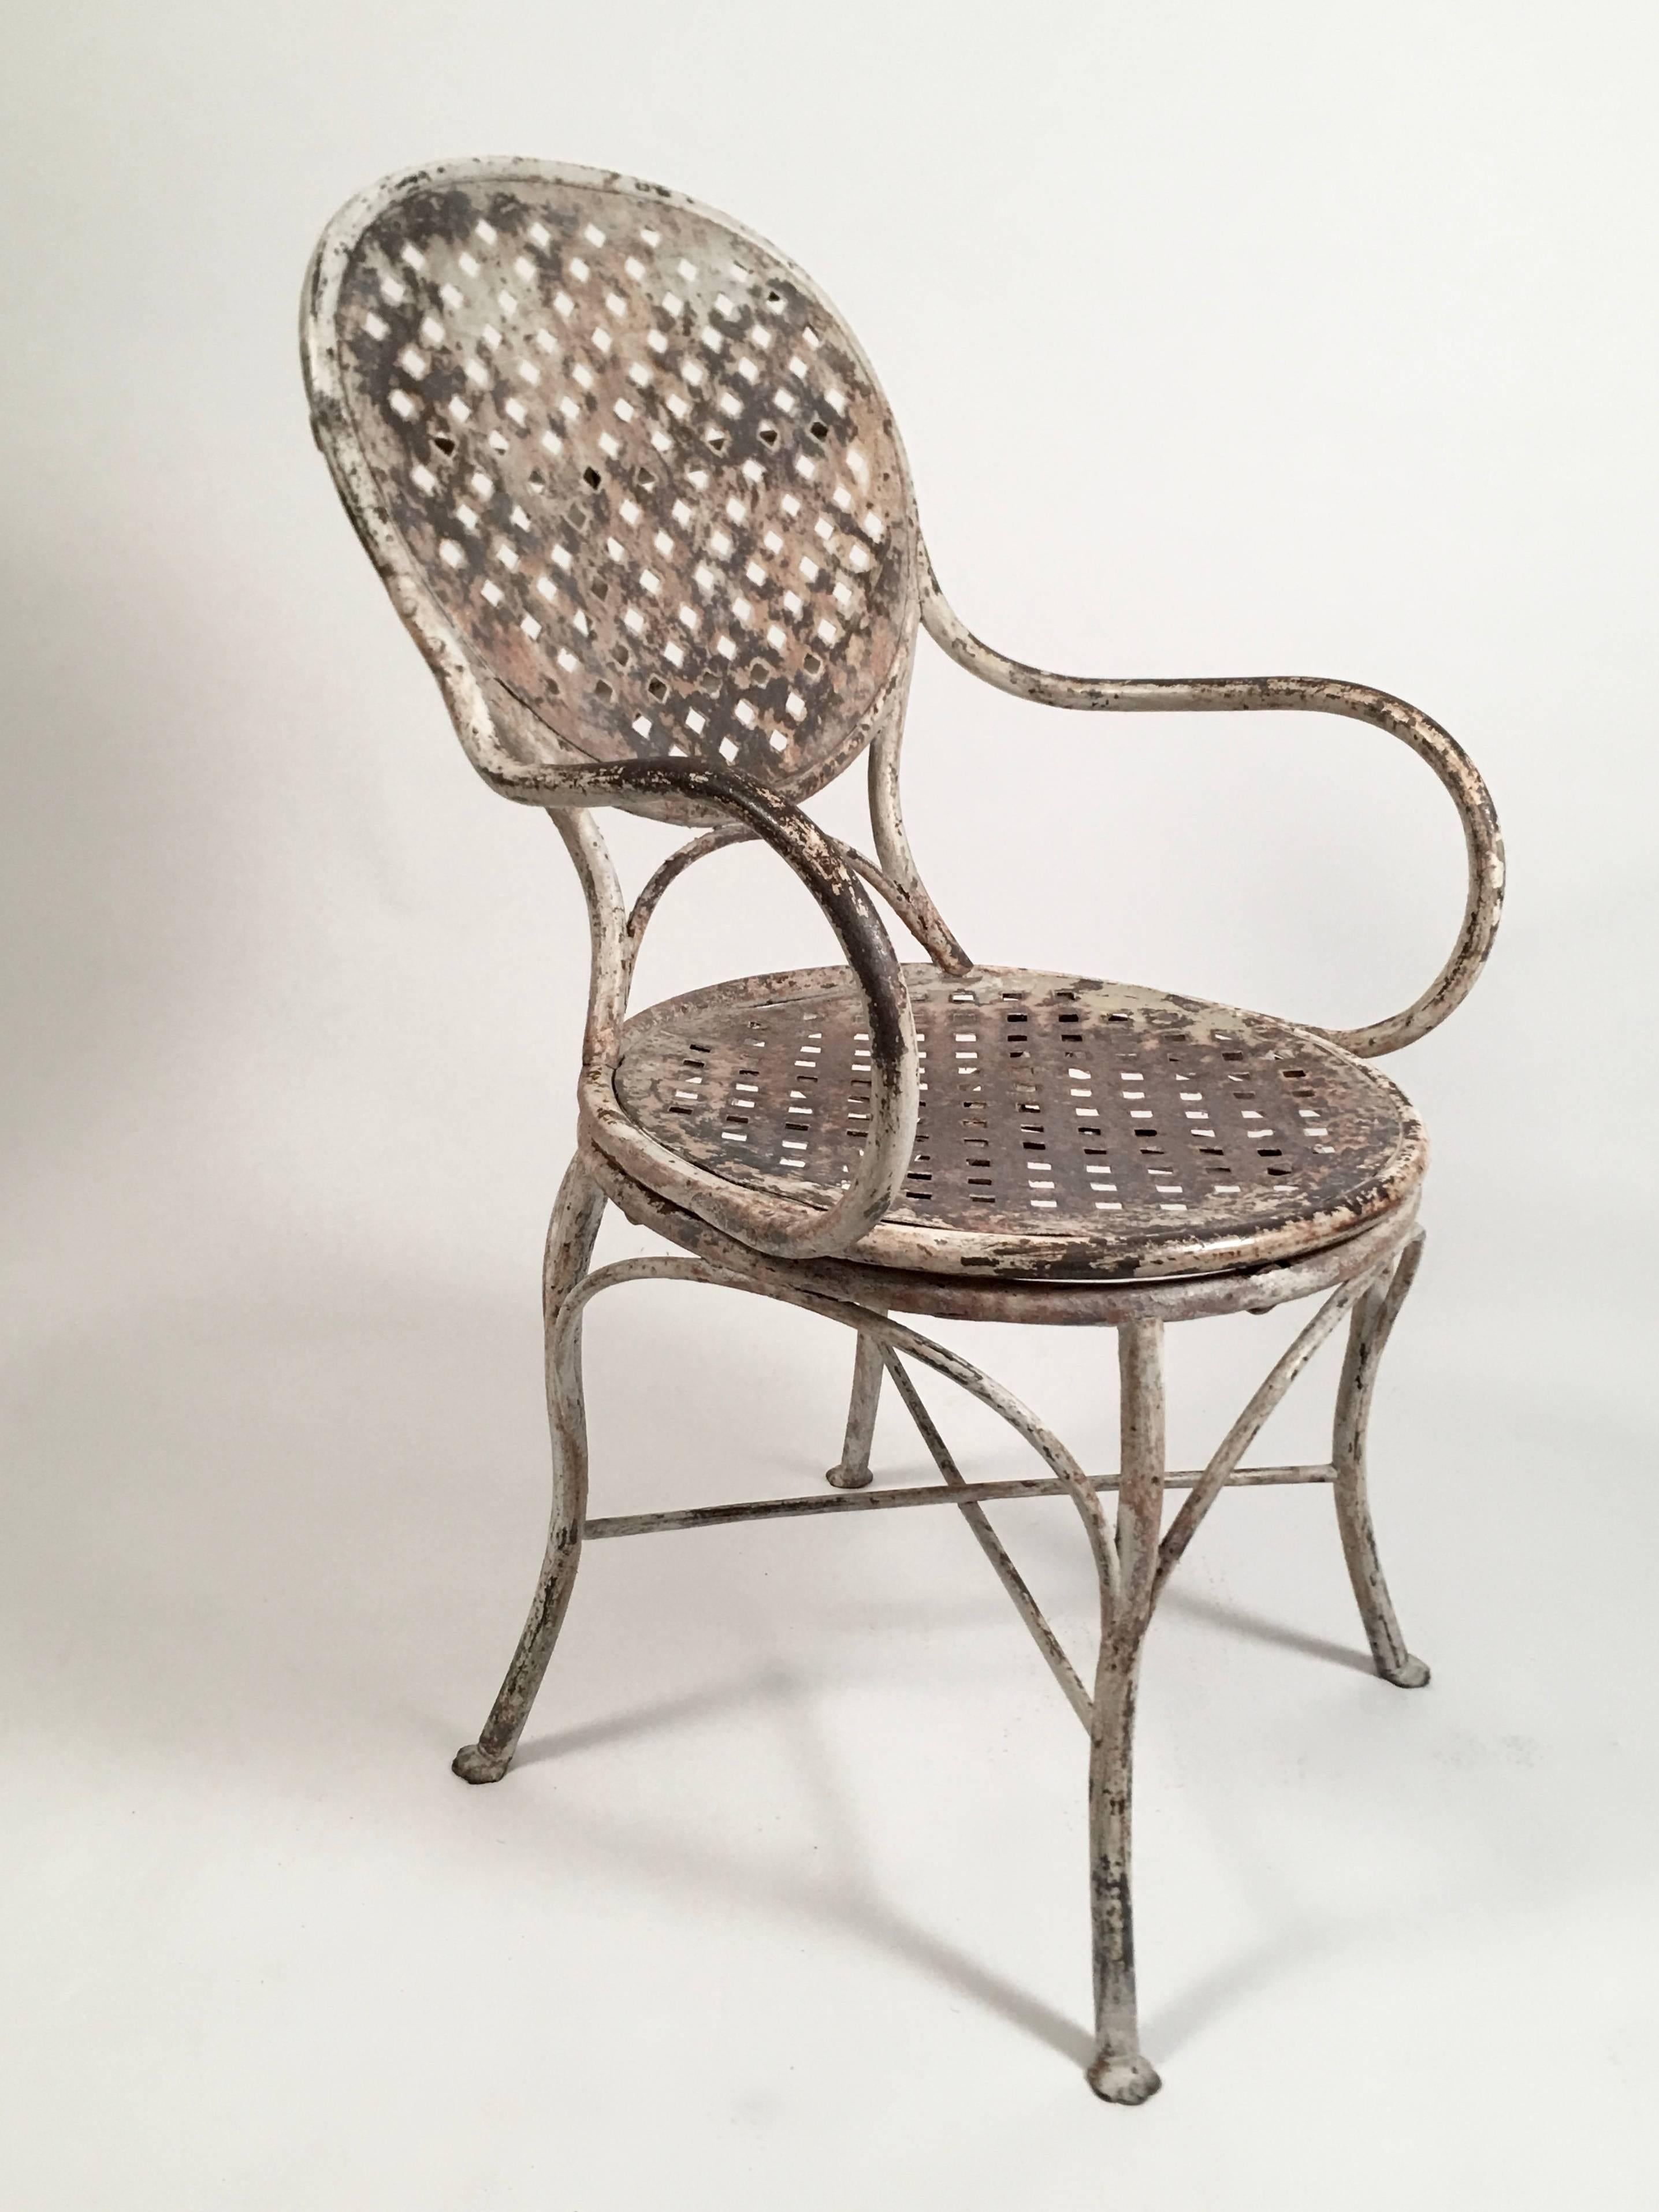 Art Deco French  Iron Garden Chair with Adjustable and Removable Umbrella, circa 1920s